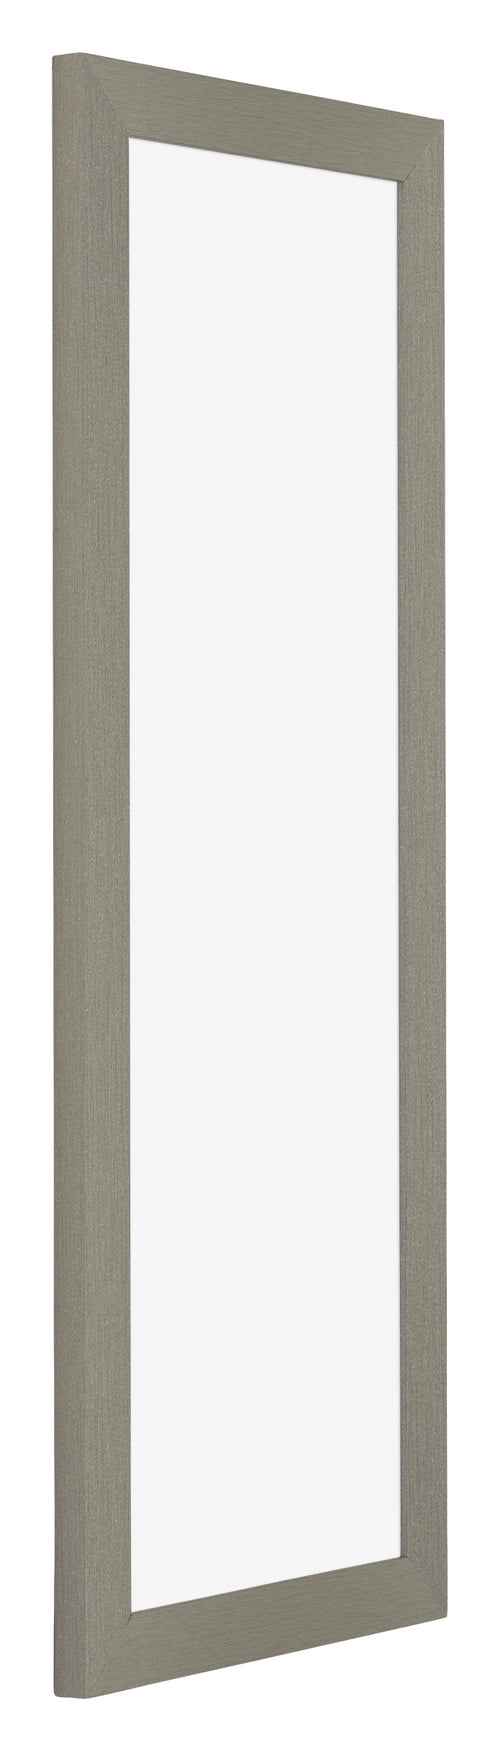 Mura MDF Photo Frame 33x98cm Anthracite Front Oblique | Yourdecoration.co.uk